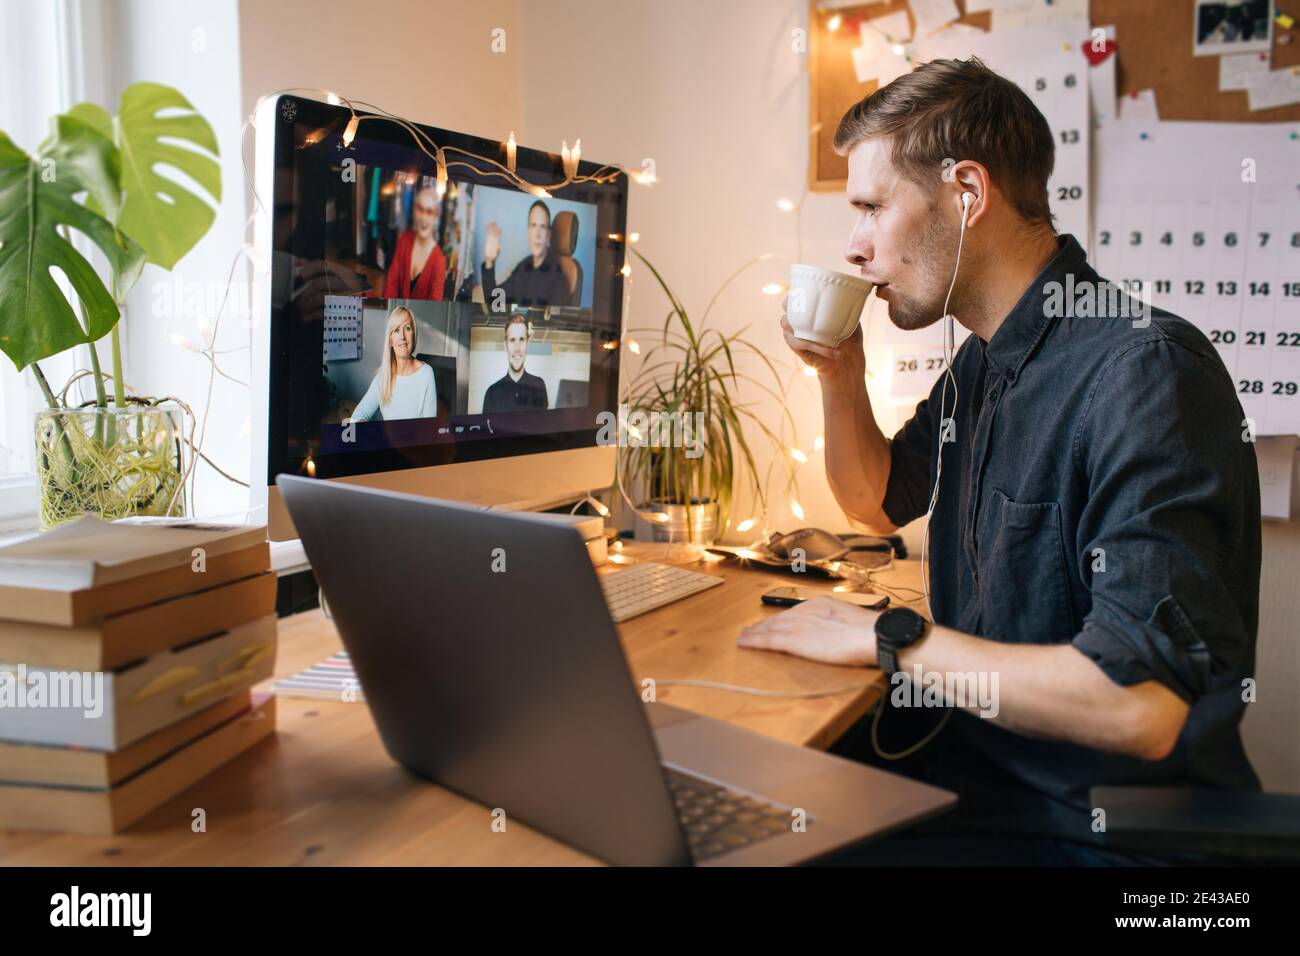 Morning coffee break during work from home. Man working on computer in office. Video conference screen remote call. Business internet telework. Stock Photo